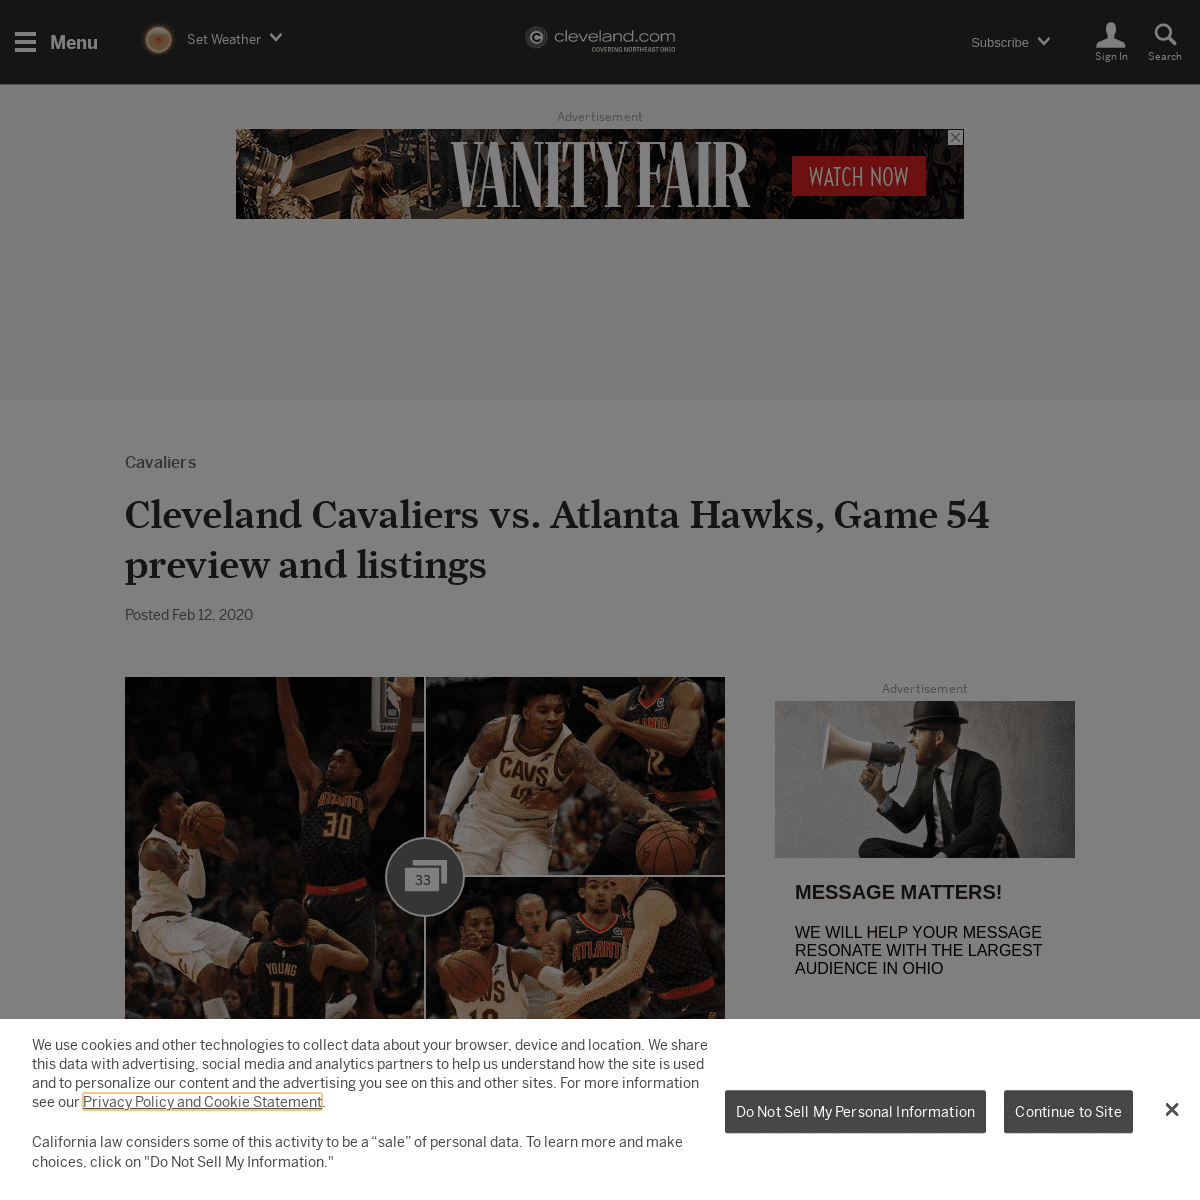 A complete backup of www.cleveland.com/cavs/2020/02/cleveland-cavaliers-vs-atlanta-hawks-game-54-preview-and-listings.html